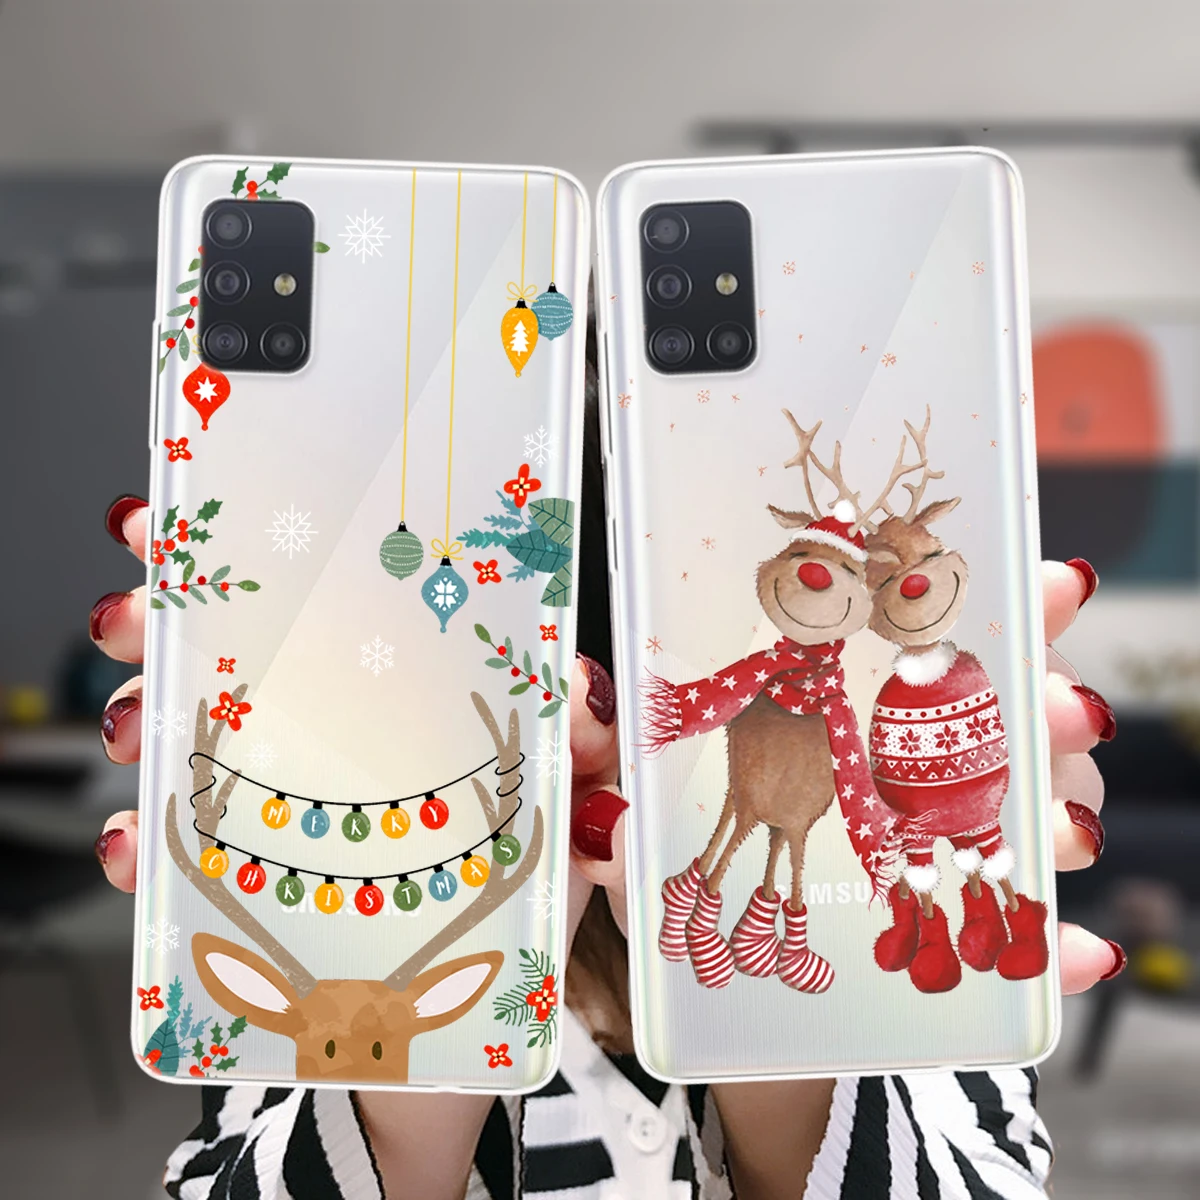 

New Year Merry Christmas Silicone Case For Samsung A52 A72 A51 A71 A50 A70 A02 A12 A42 A32 A31 A21S A41 A20 A30 A40 A11 Cover